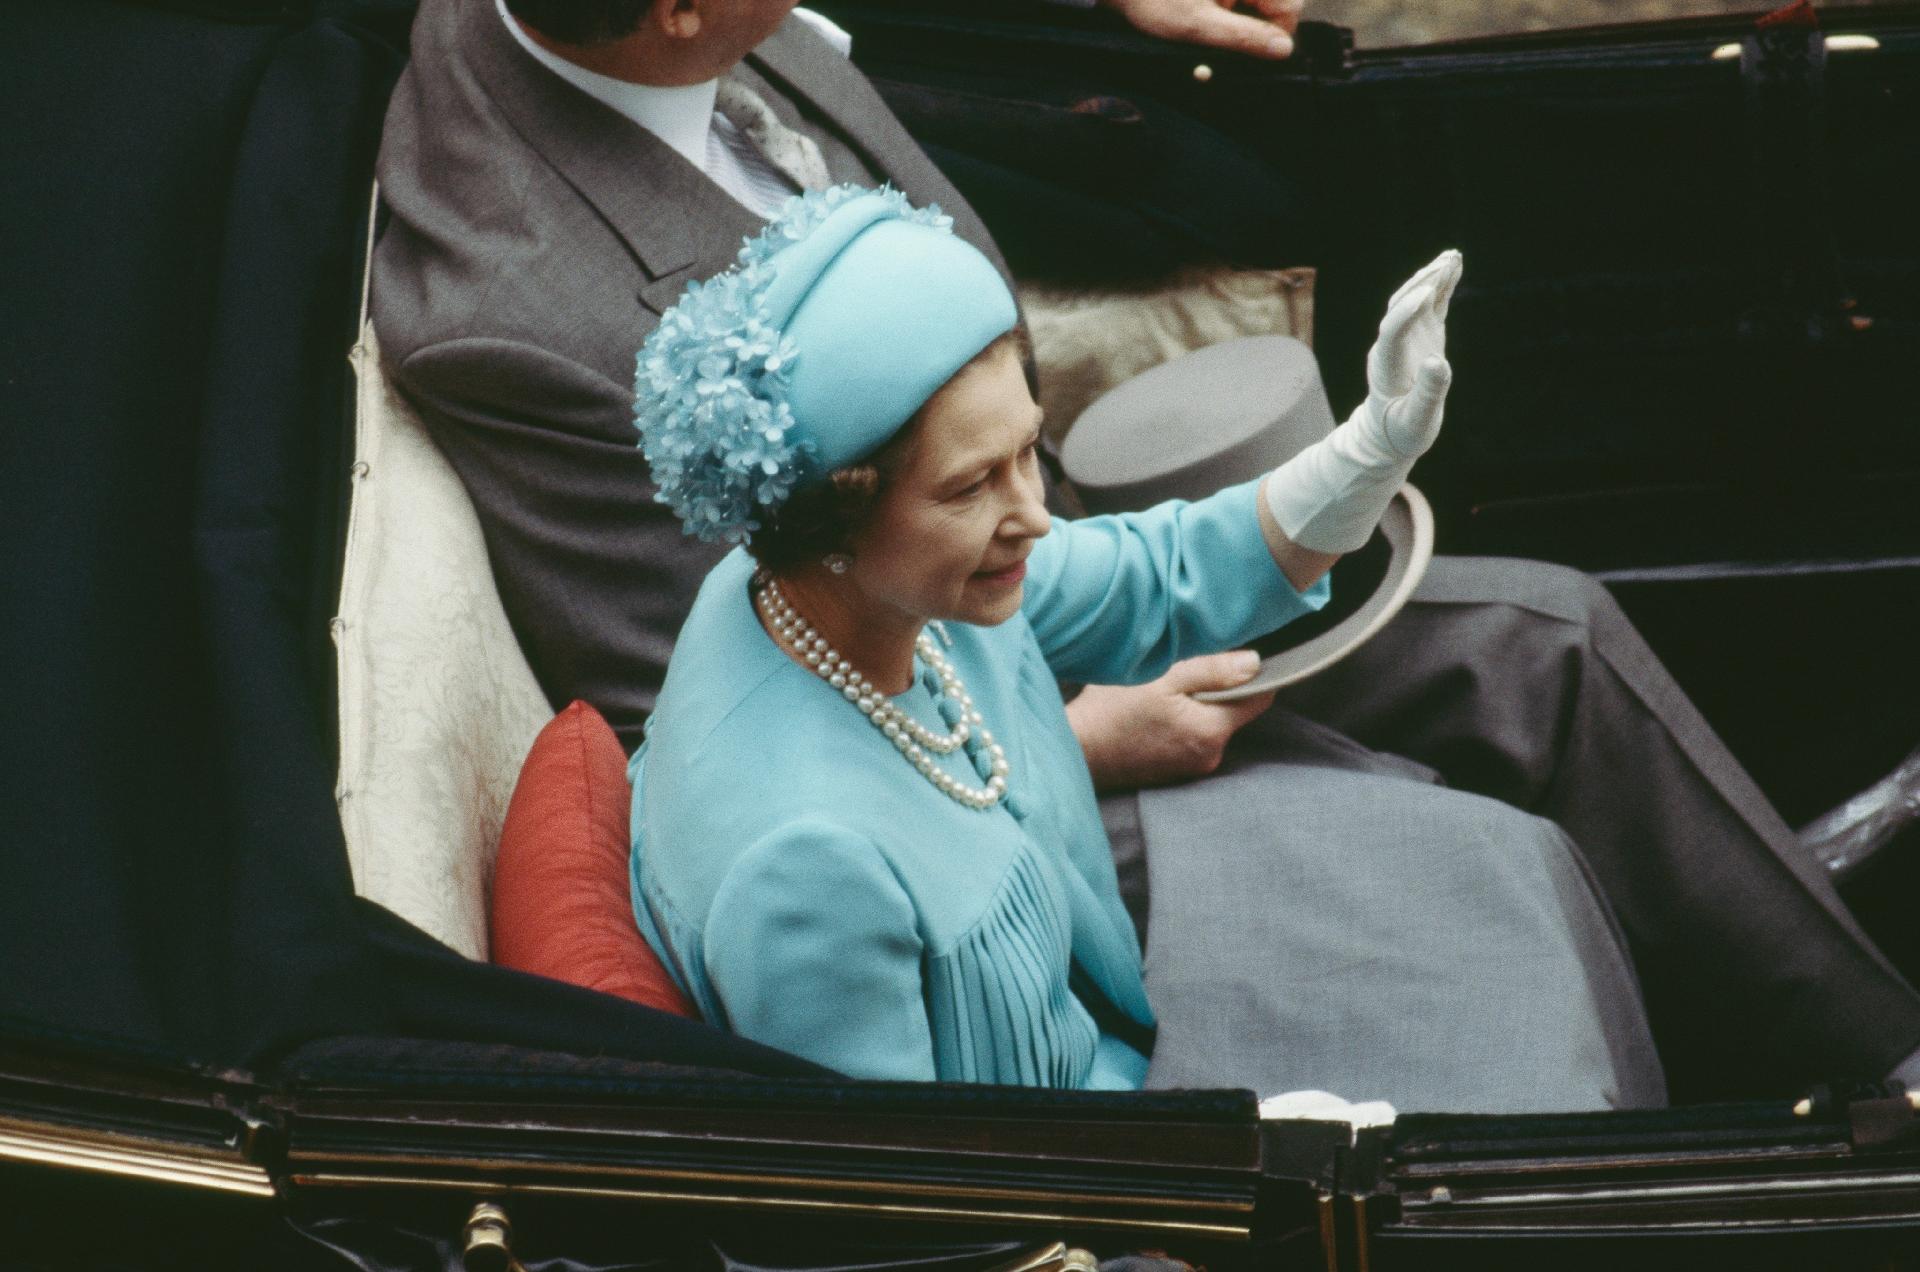 Queen Elizabeth II arrives at the wedding of Charles and Diana in July 1981 - Getty Images